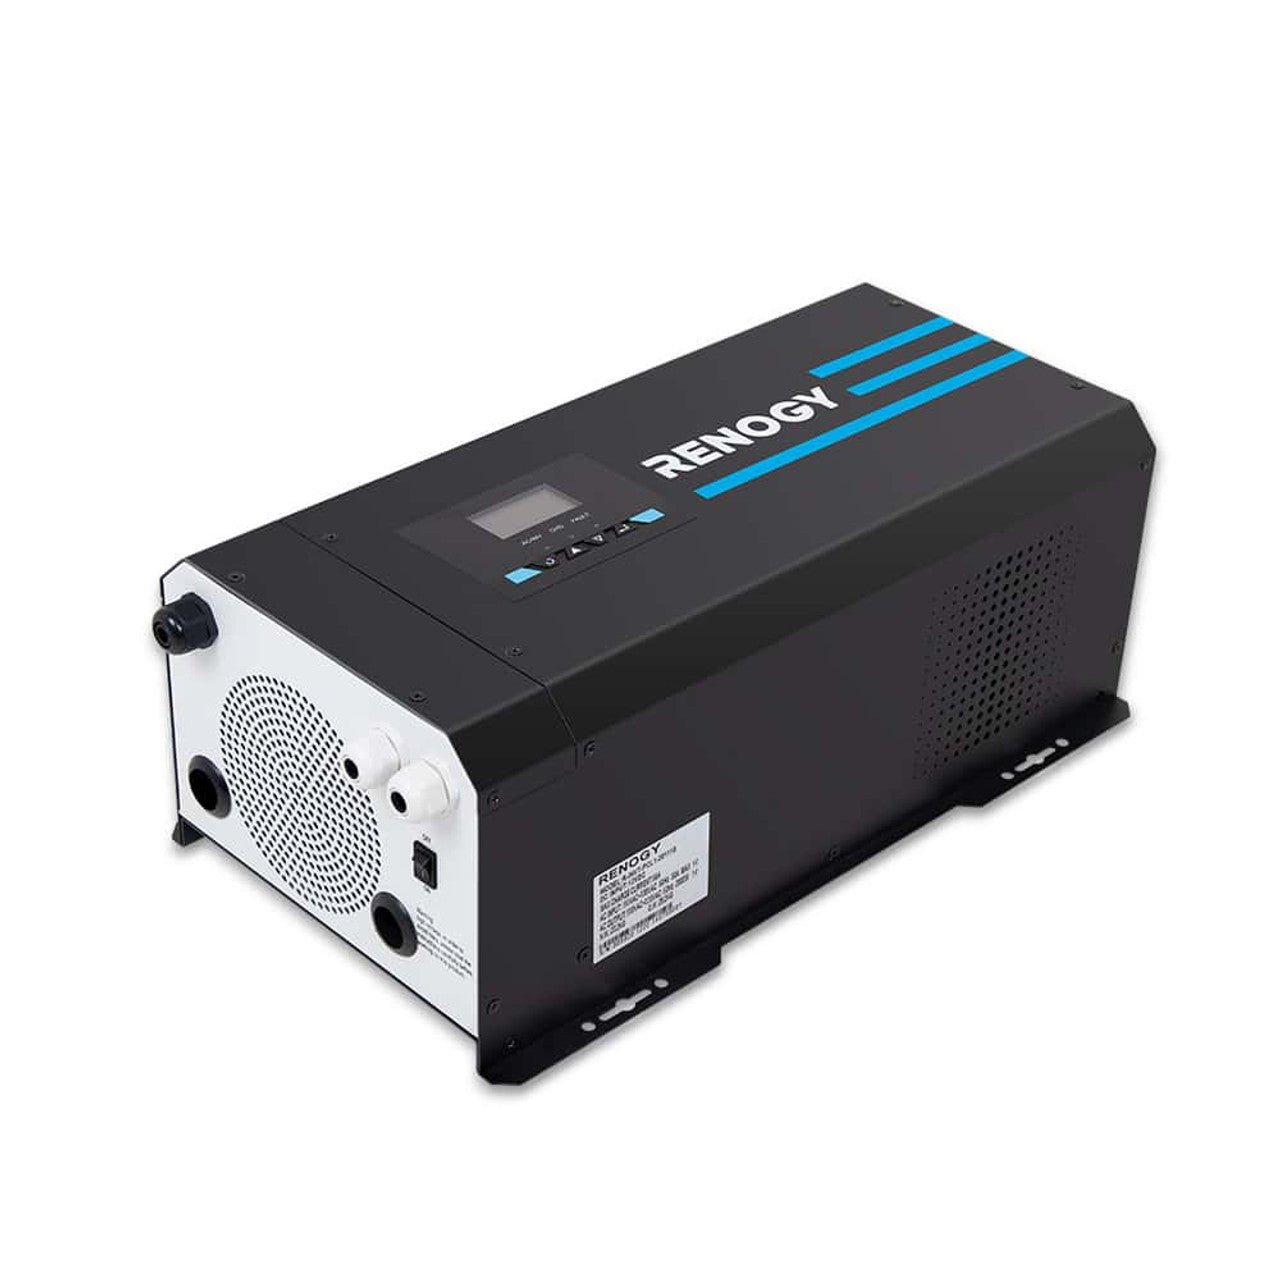 Renogy 3000W 12V Pure Sine Wave Inverter Charger w/ LCD Display - Solar Generators and Power Stations Plus